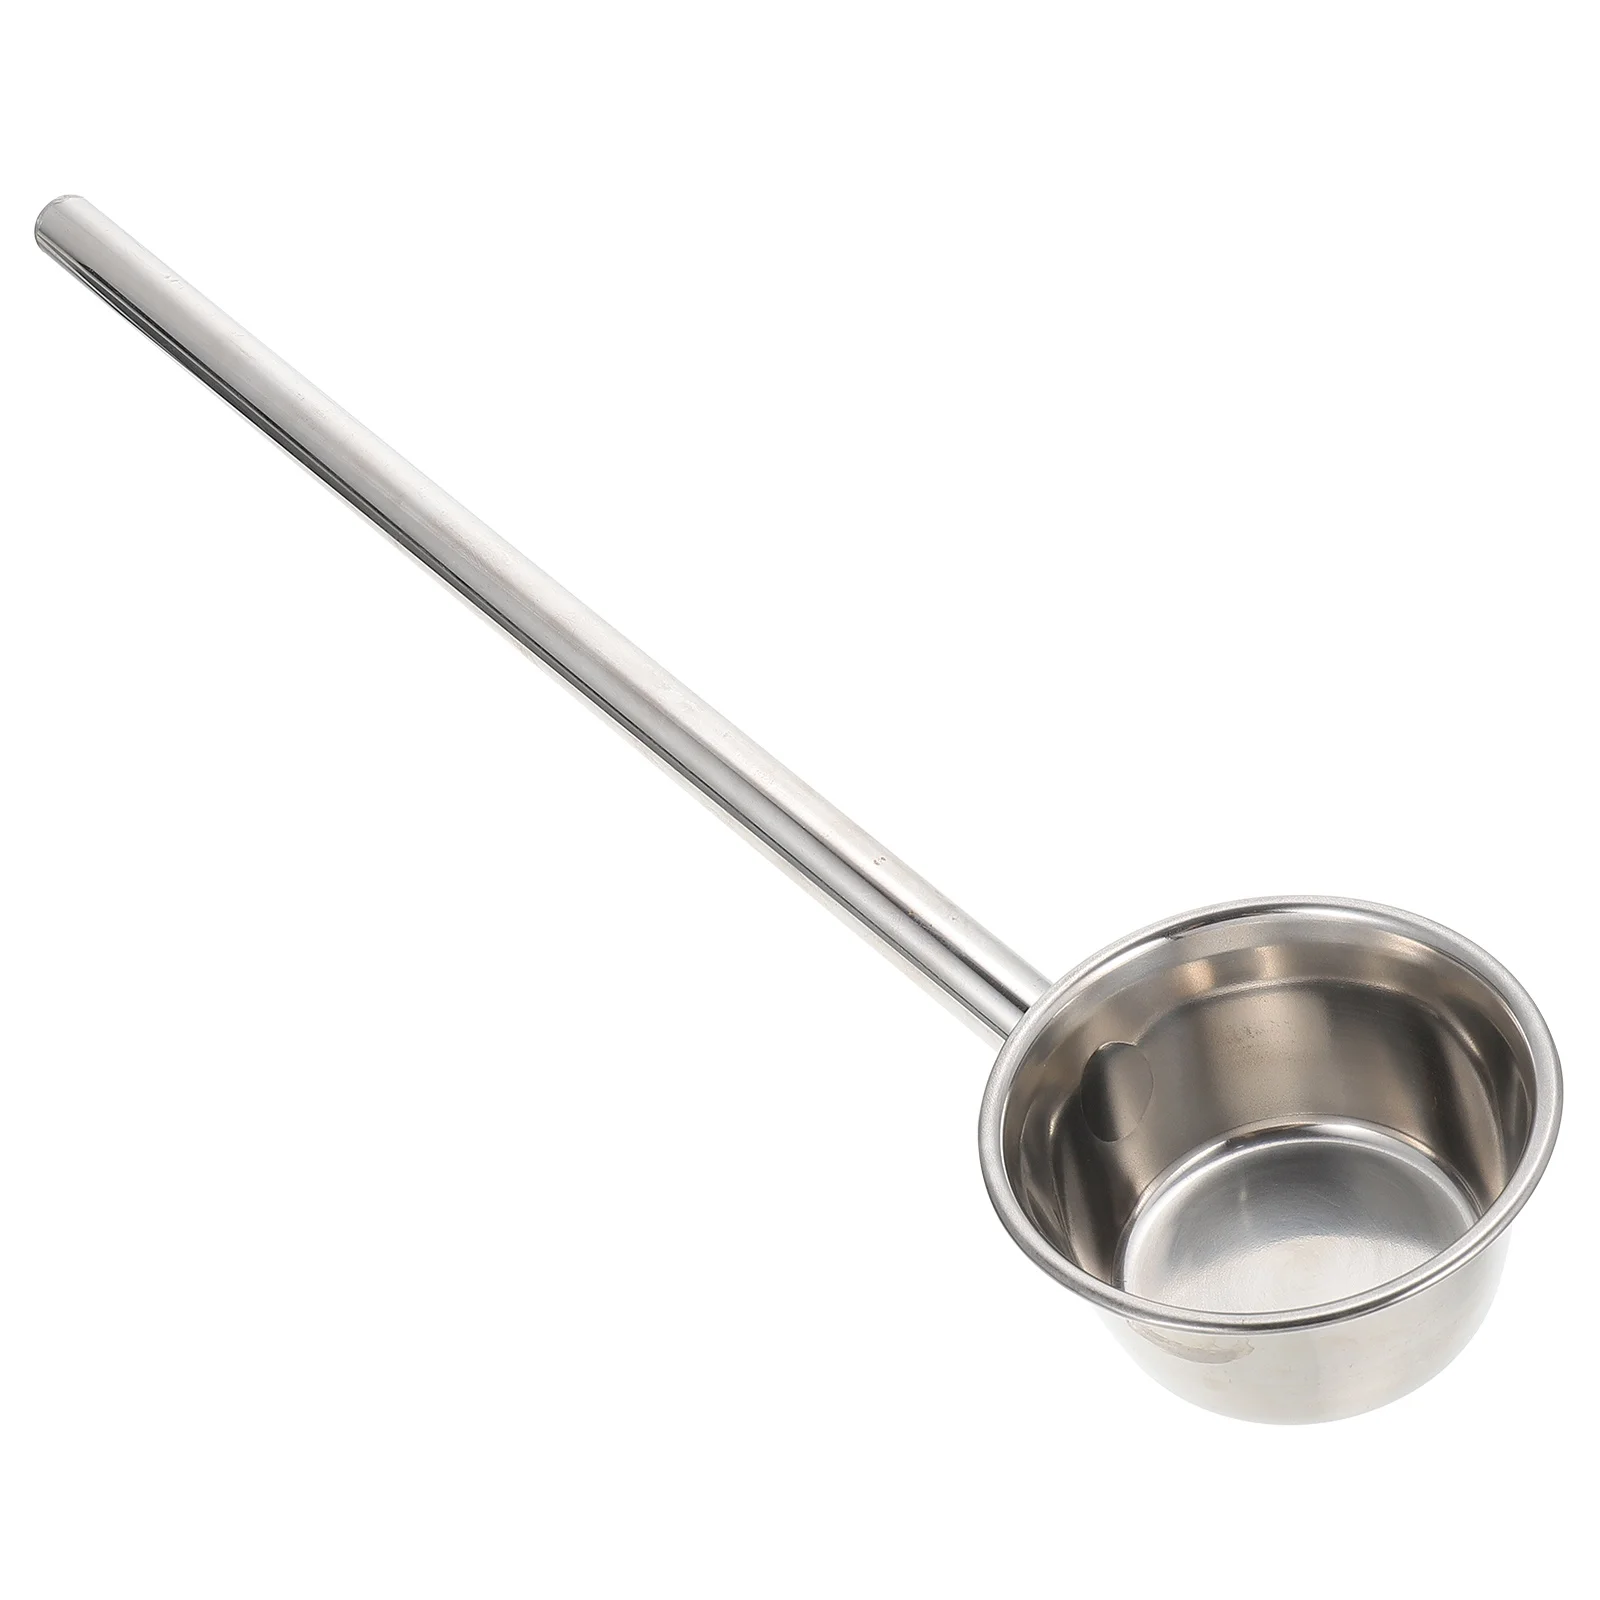 

Bucket Kitchen Gadget Portable Soup Ladle Long Handle Spoon Canteen Shampoo Holder Chinese Spoons Stainless Steel Home